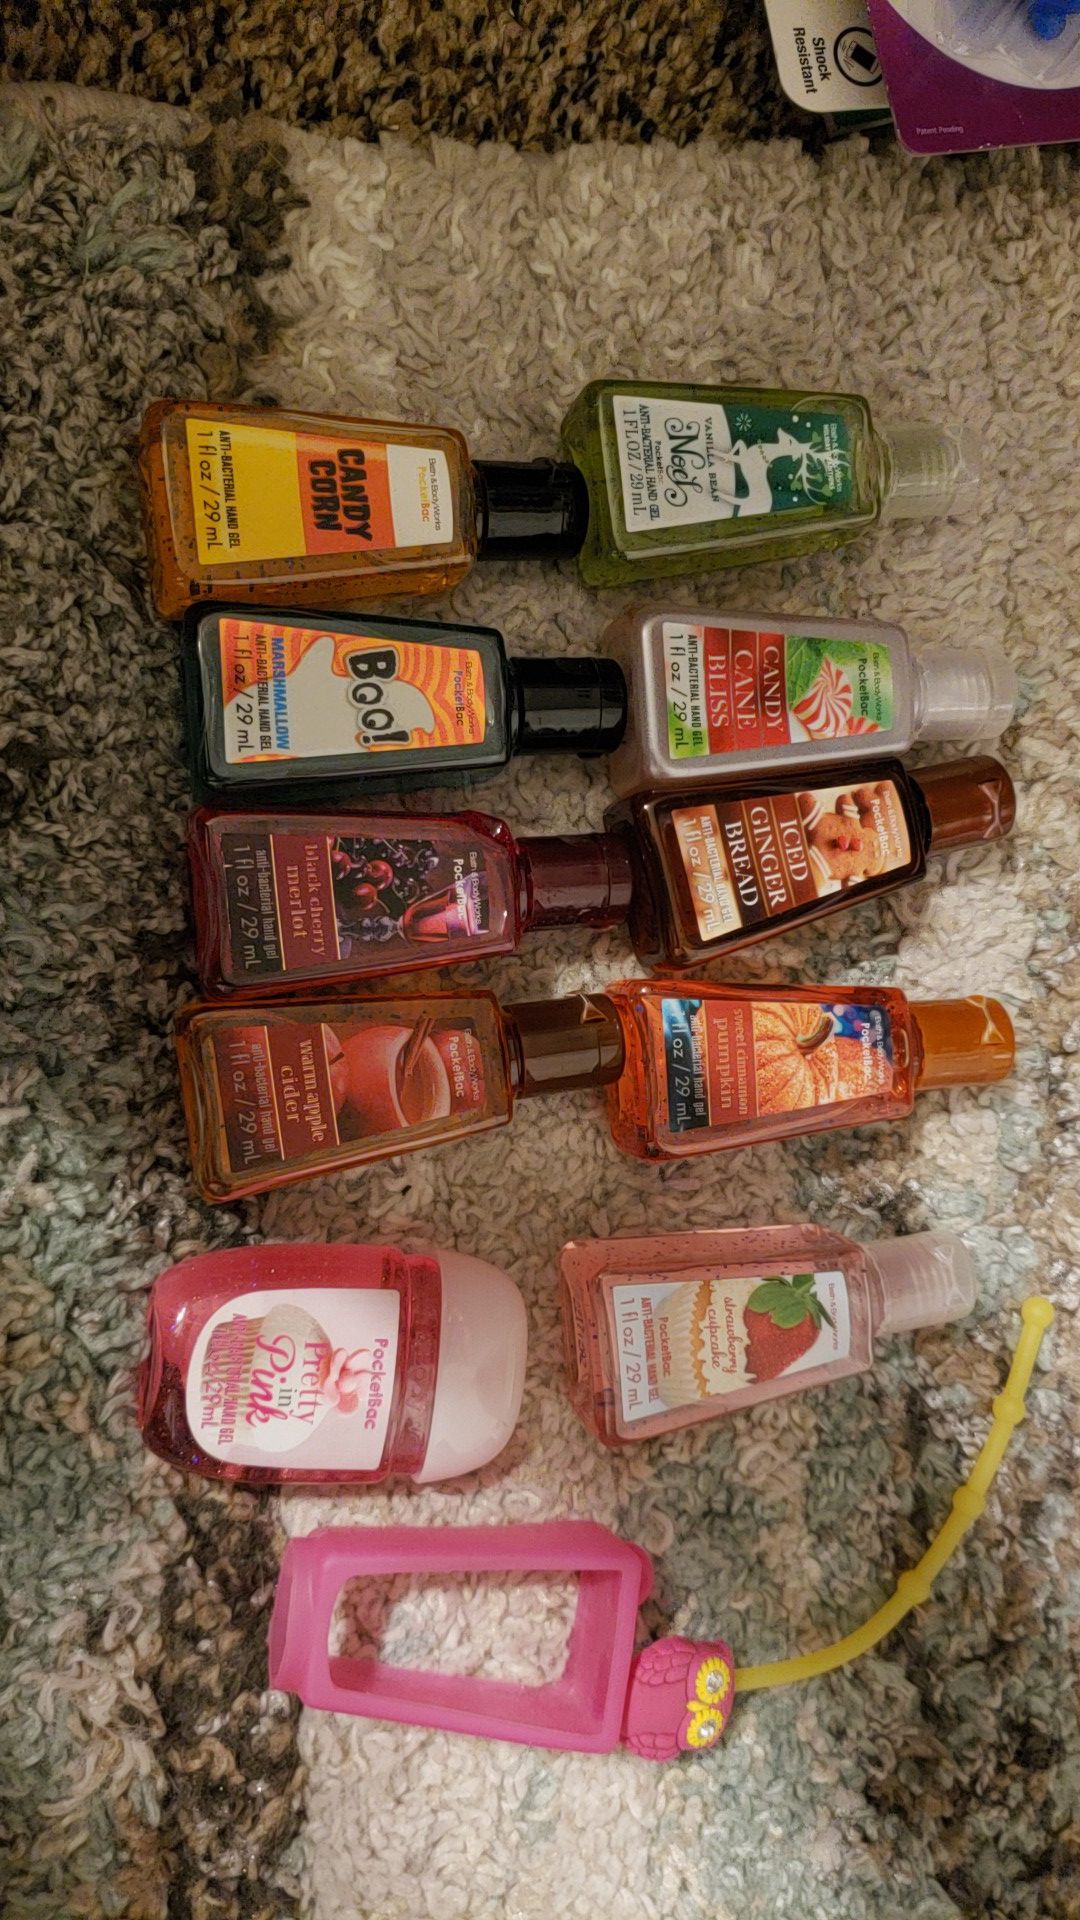 BATH AND BODY WORKS MAHOGANY TEAKWOOD! 2 PIECE MENS LOTION SANITIZERS  GIFT SET BRAND NEW! for Sale in Seven Points, TX - OfferUp